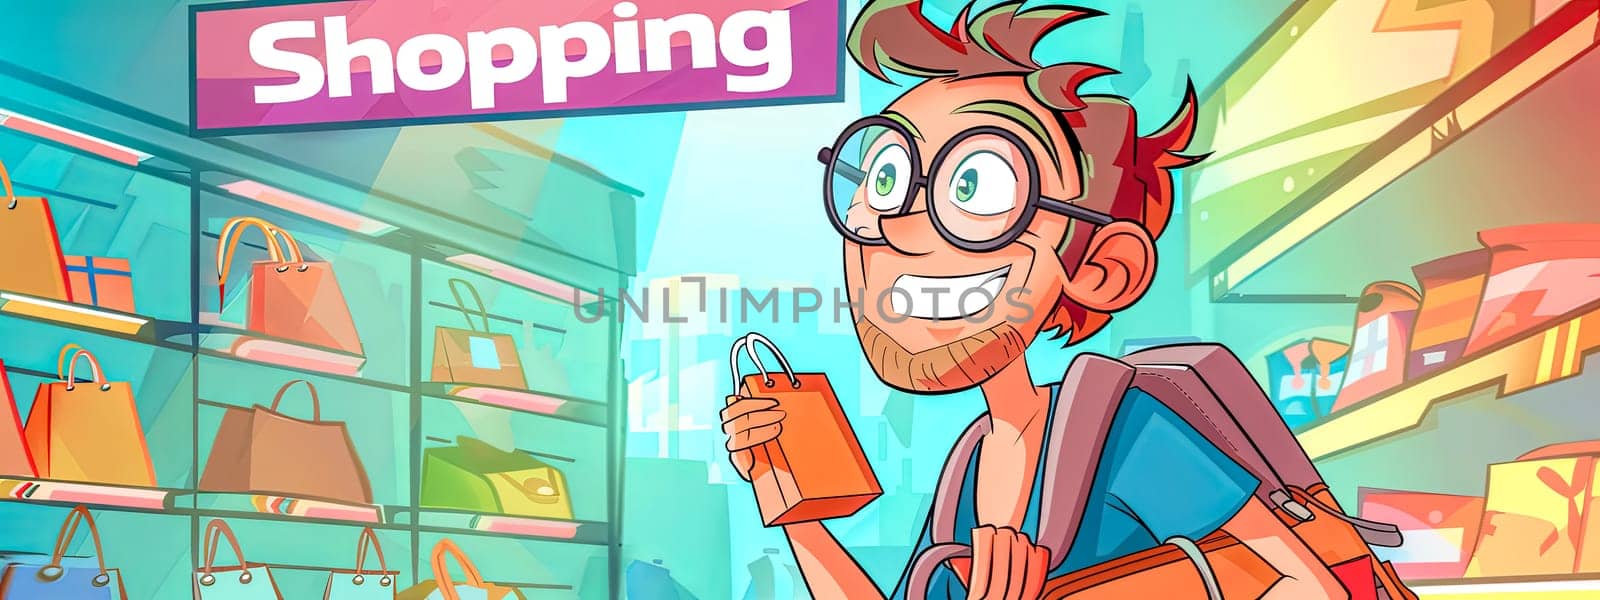 Excited shopper in a cartoon mall by Edophoto